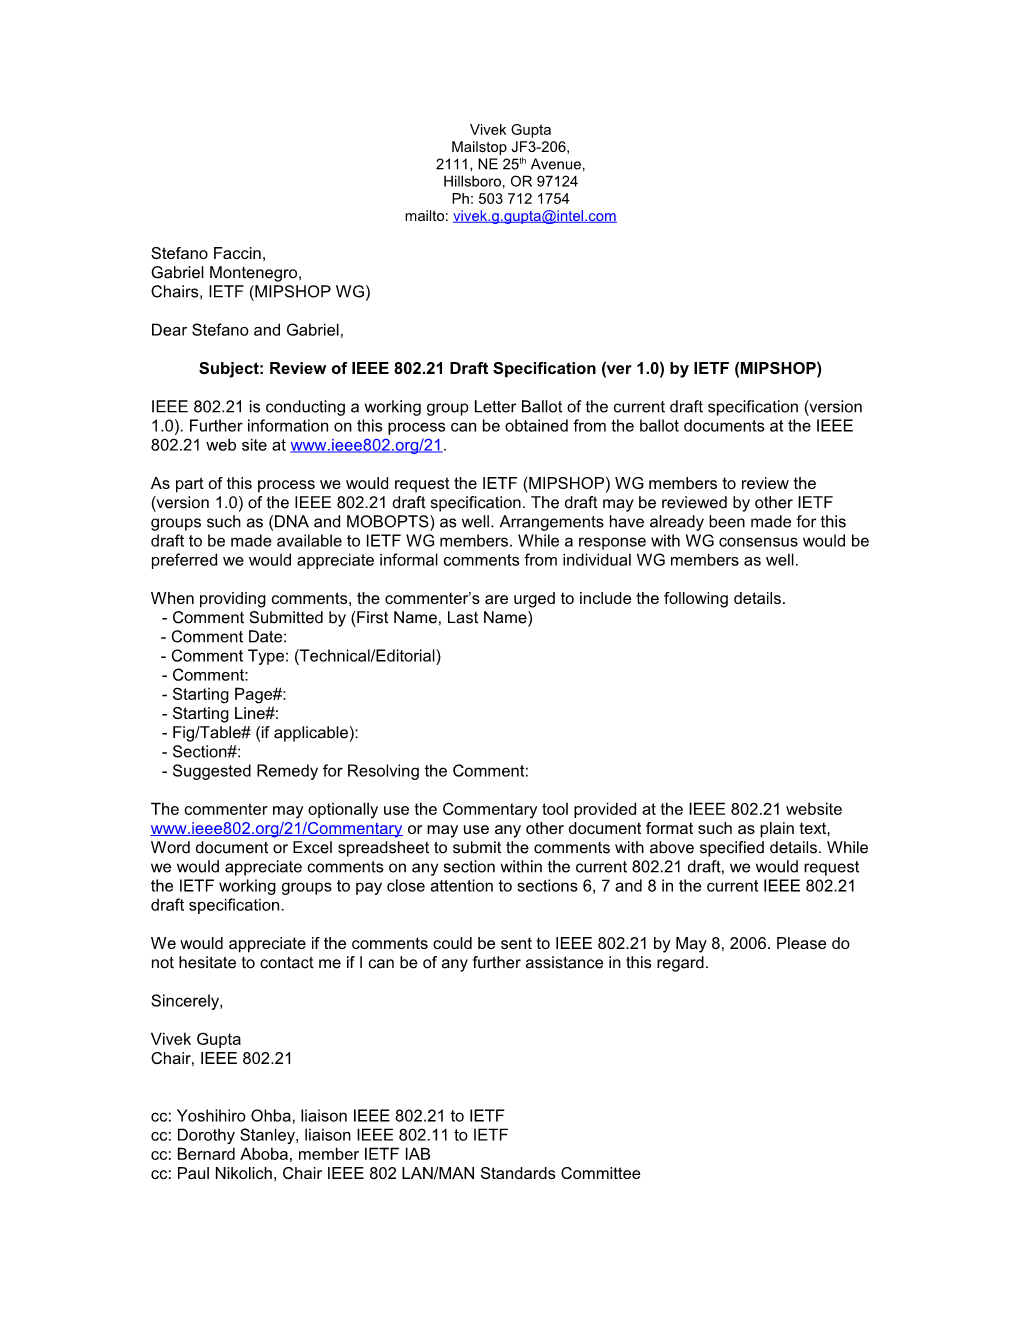 Subject: Review of IEEE 802.21 Draft Specification (Ver 1.0) by IETF (MIPSHOP)